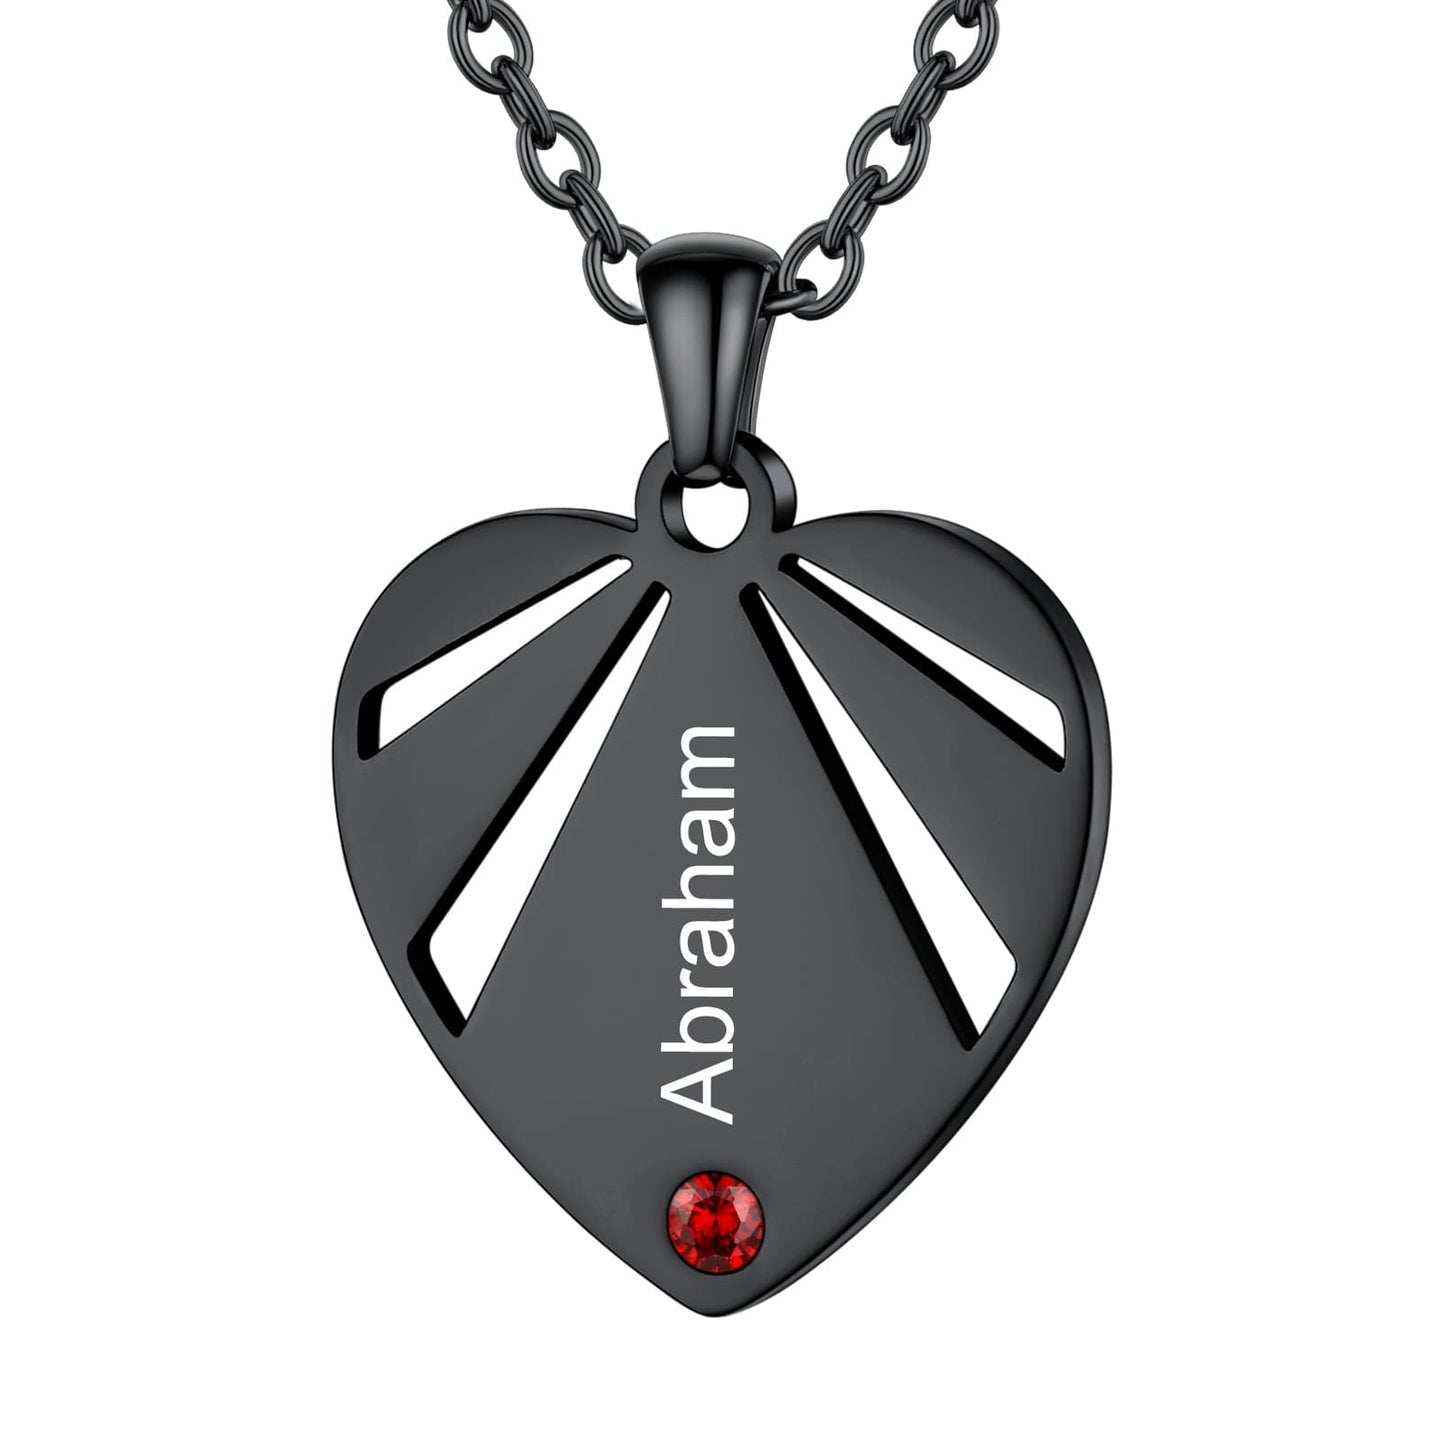 Personalized Engraved Heart Birthstone Necklace black 1 stone